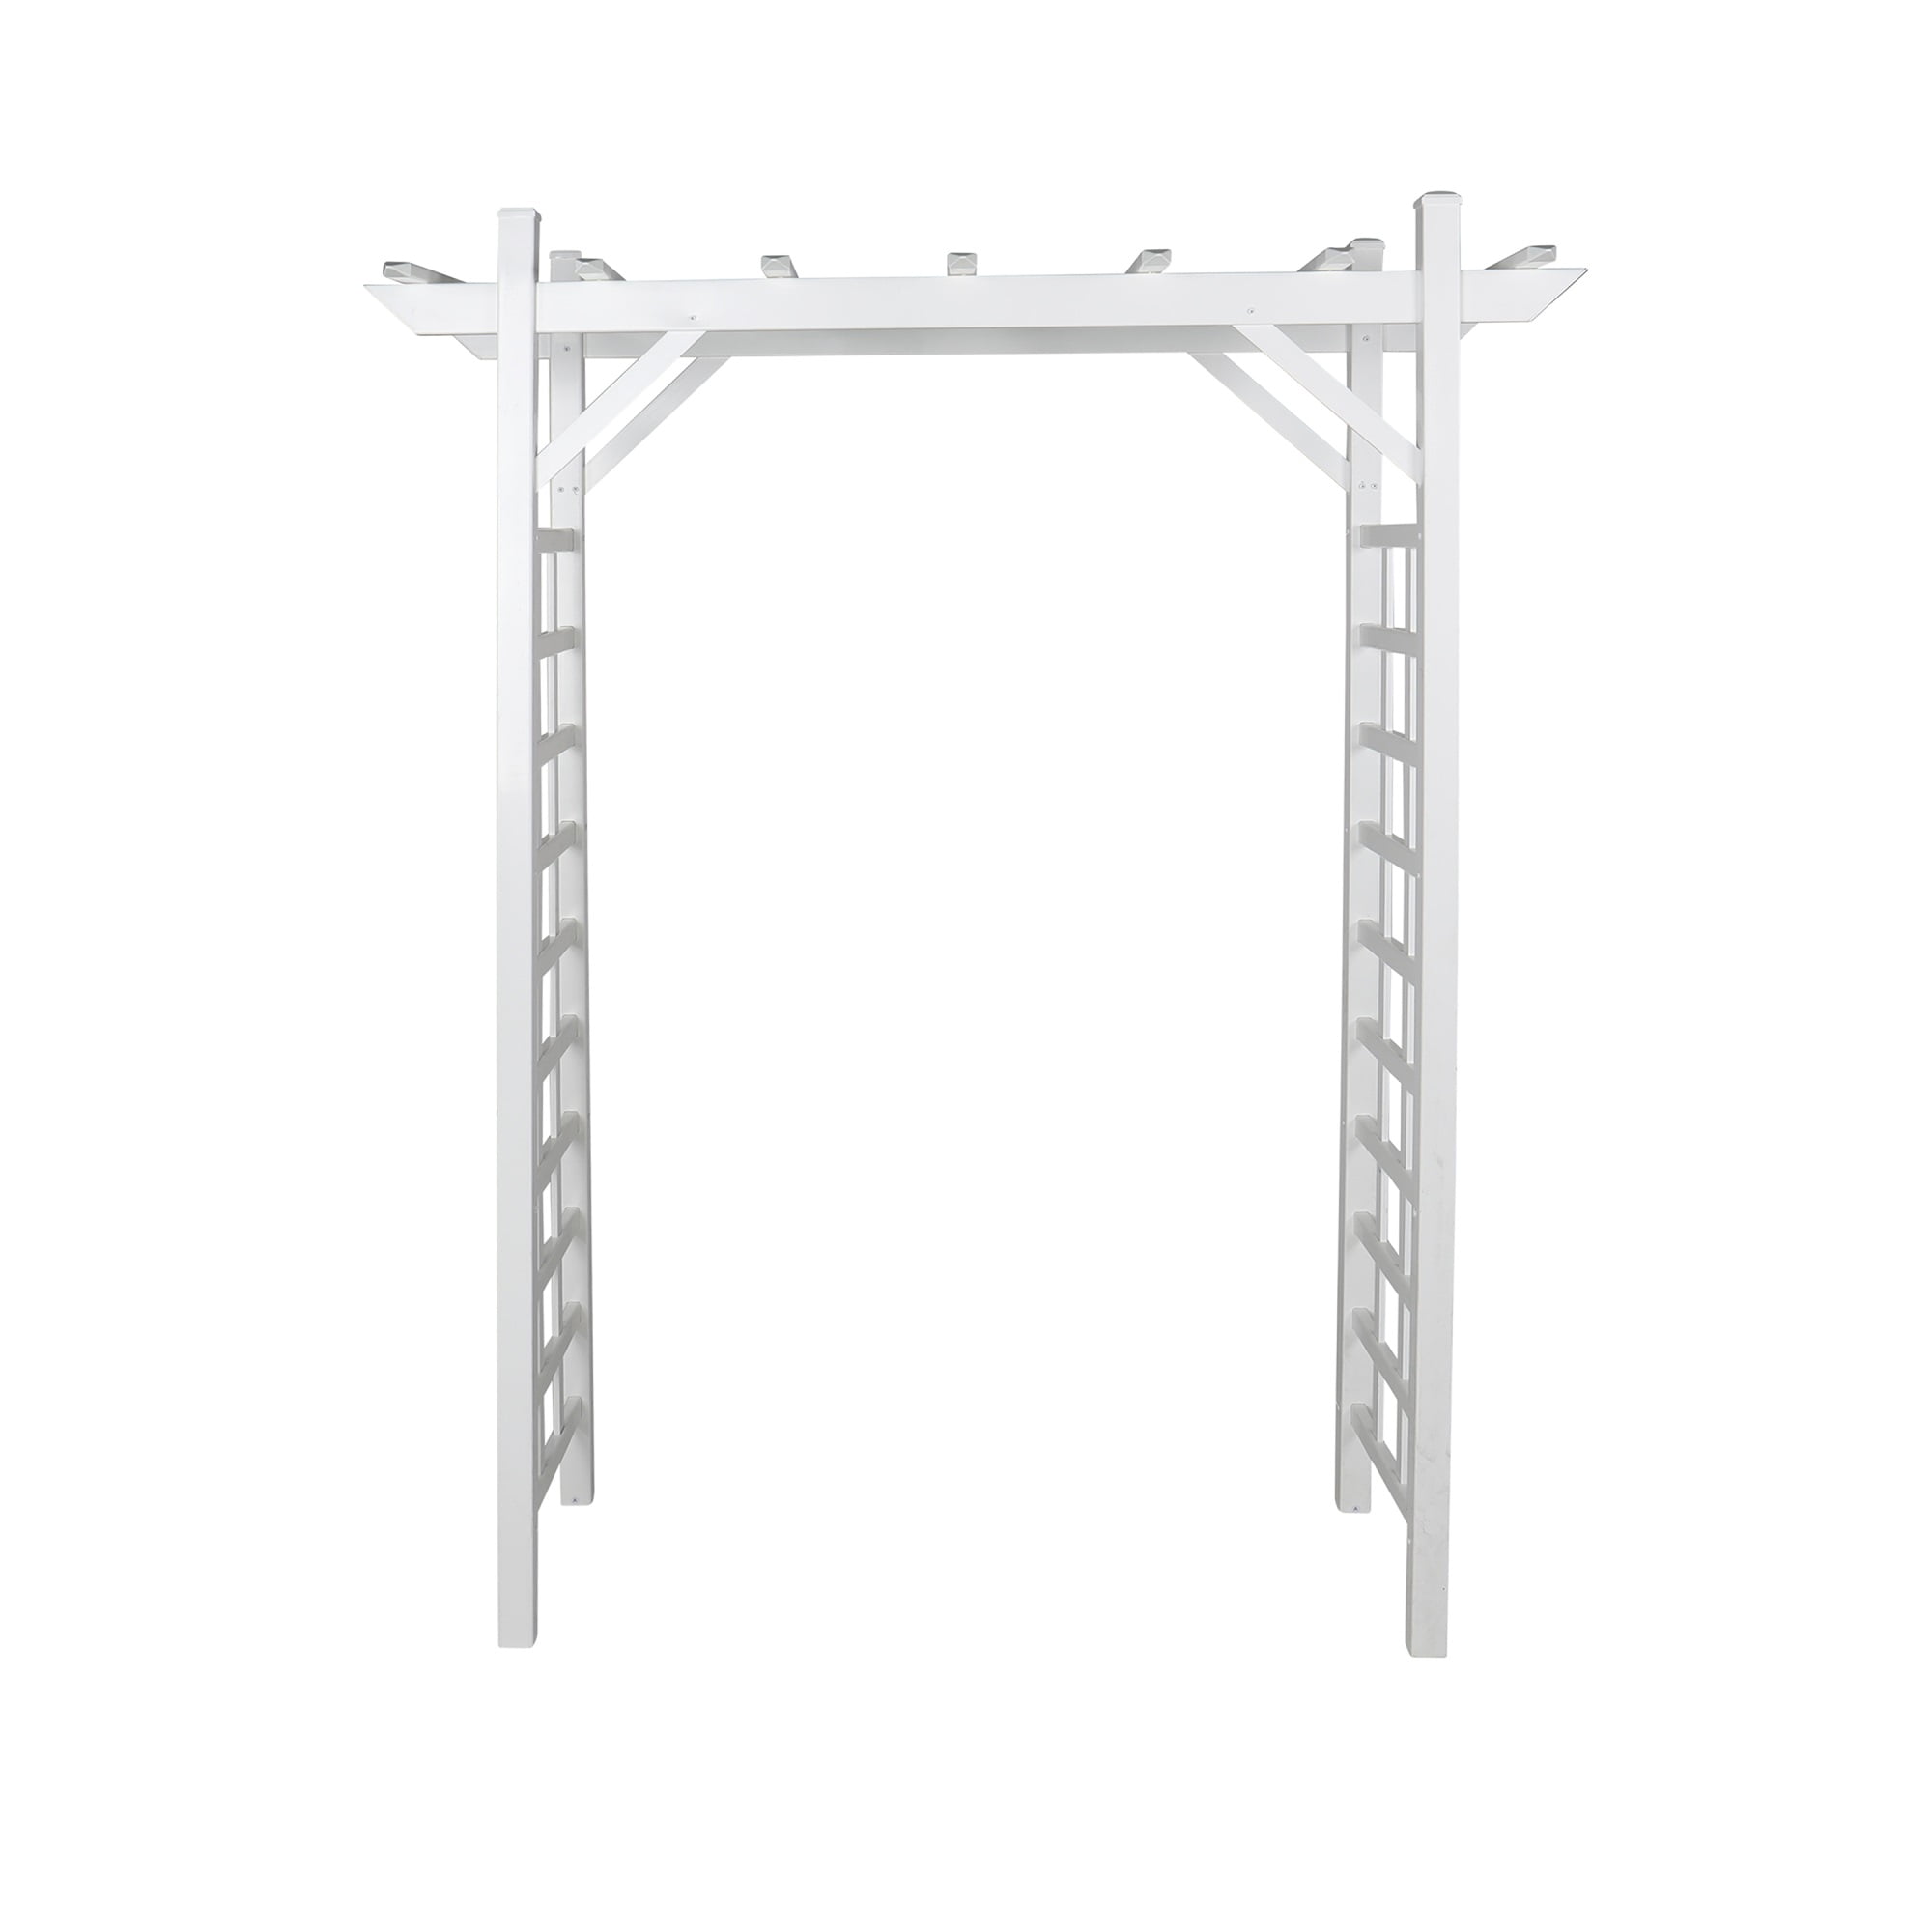 84.8 in. x 64 in. PVC Arched Arbor - Walmart.com